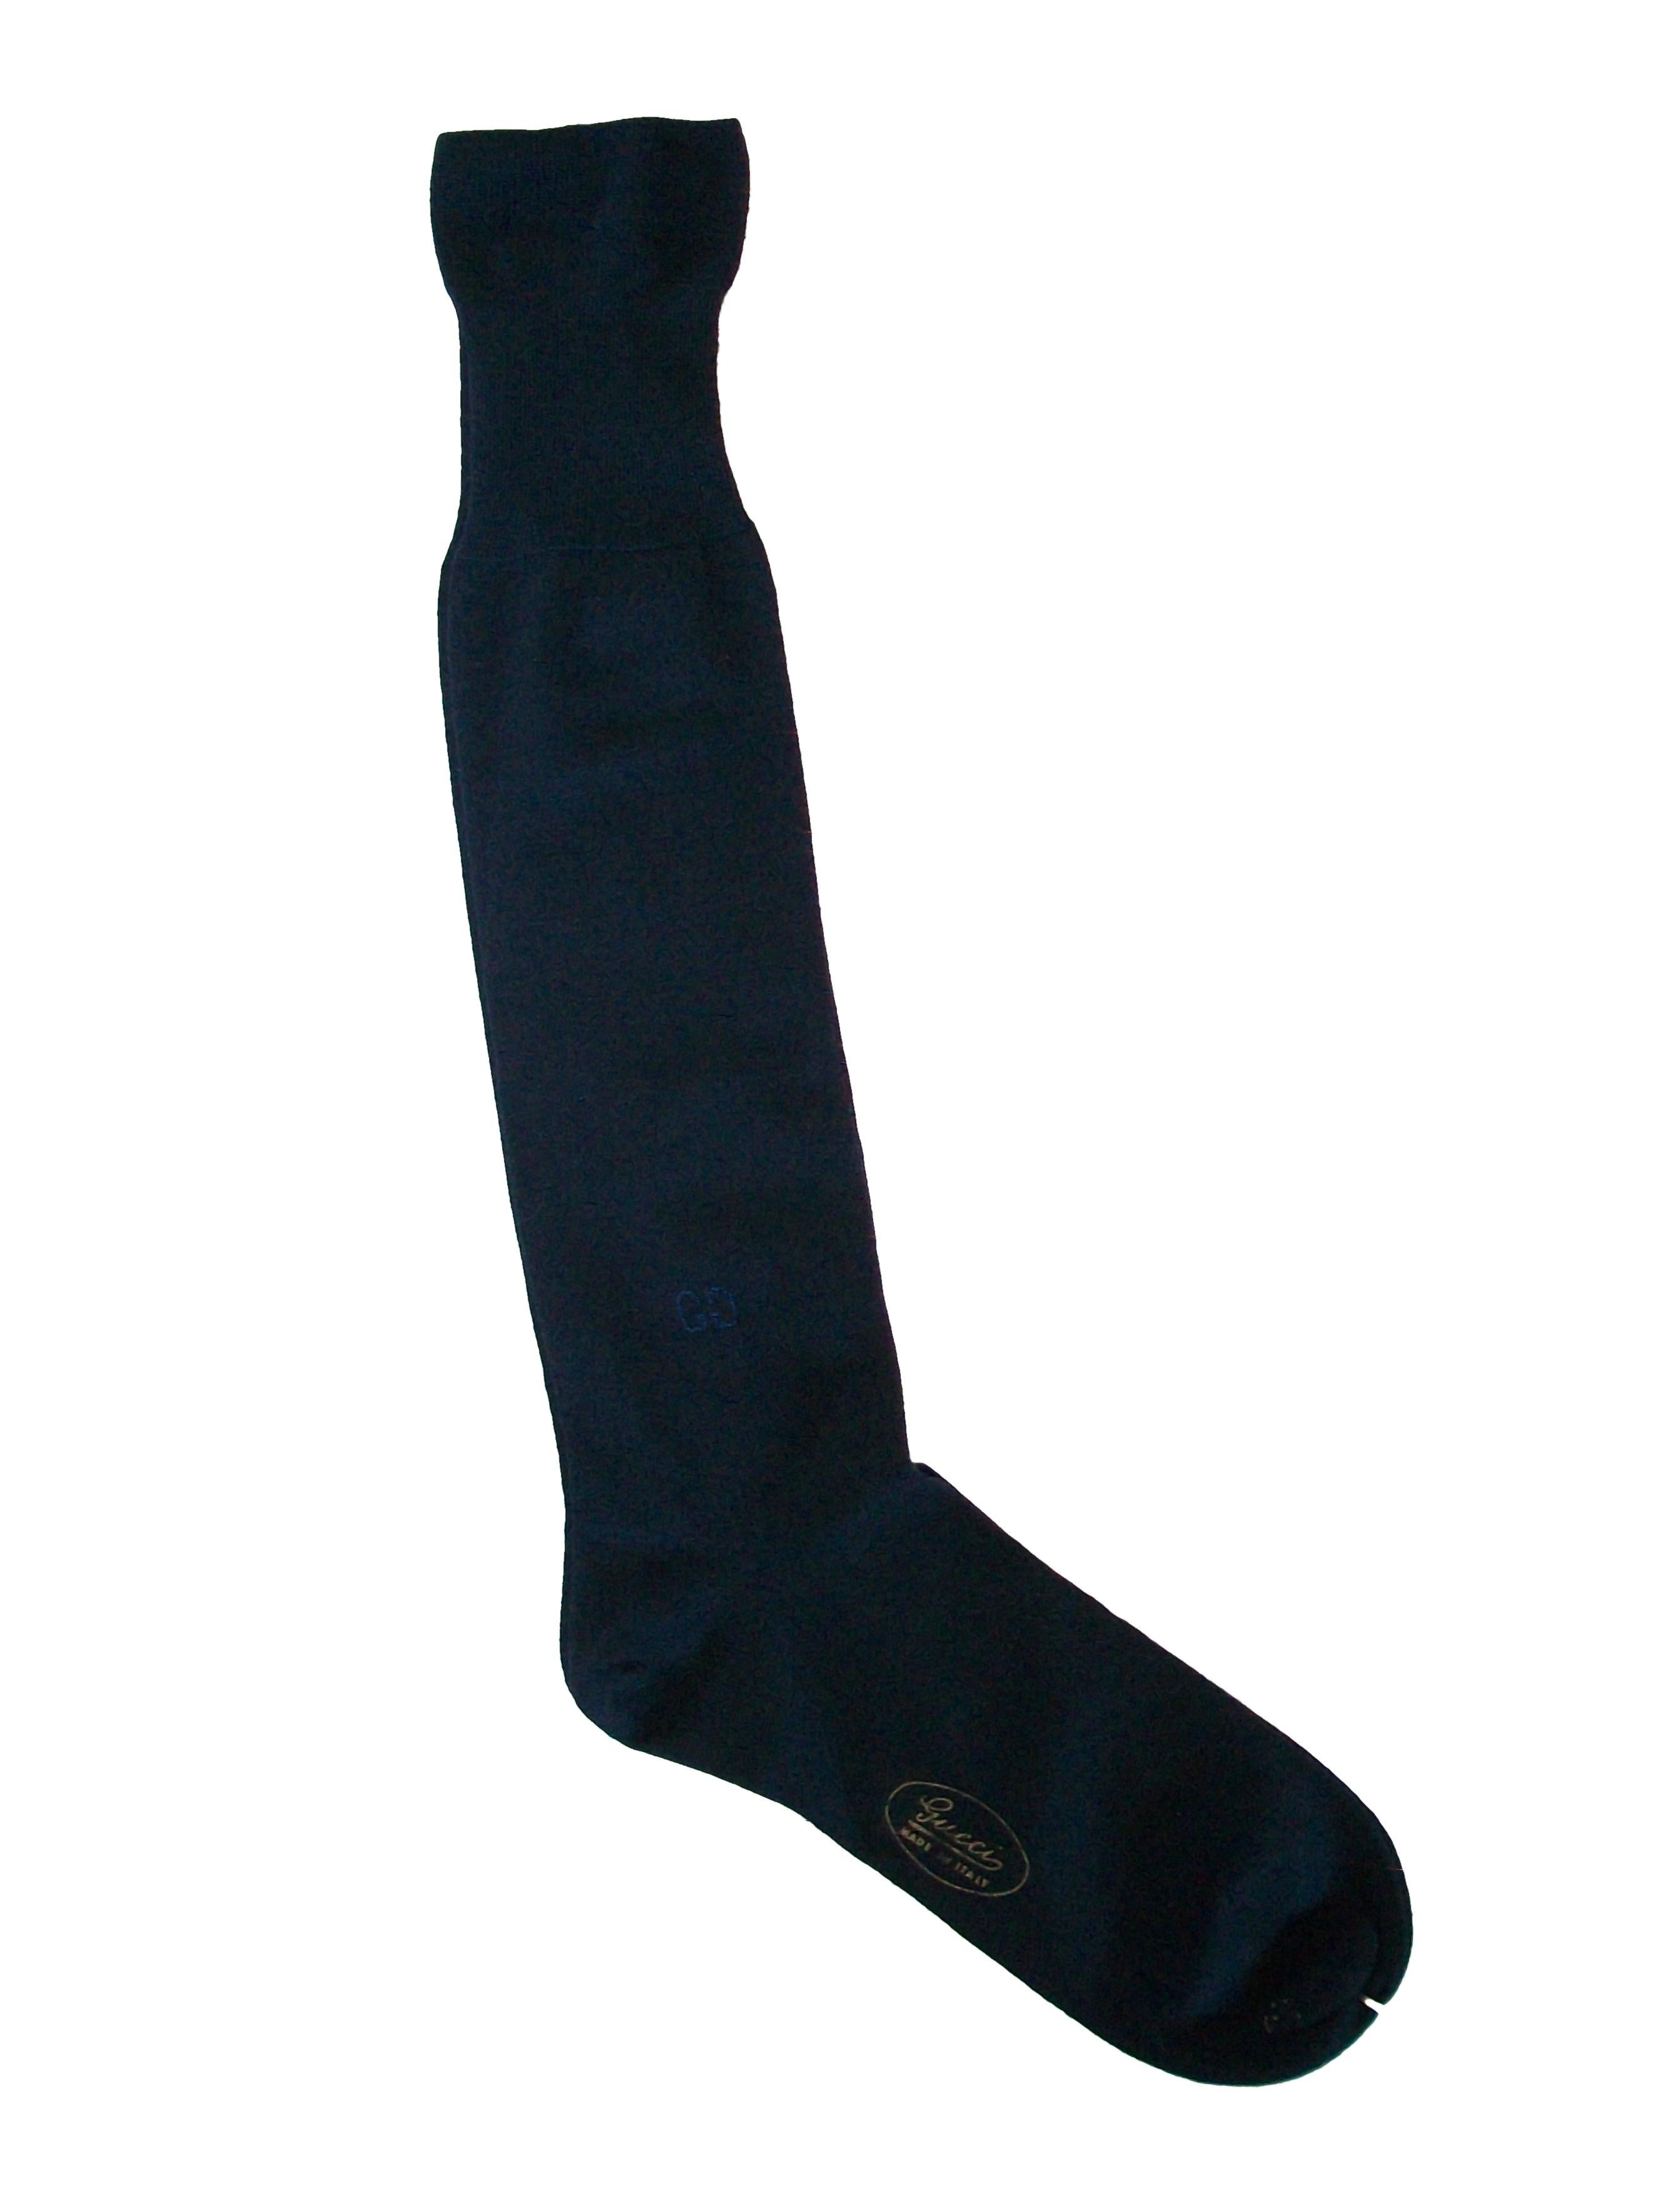 GUCCI - Vintage men's luxe navy blue dress socks - 70% cashmere/30% silk - knee high with fold-over cuffs - hand sewn/embroidered GG logo to each sock - original retail label - Italy - circa 1980's.

Excellent condition - never worn/new with tags -